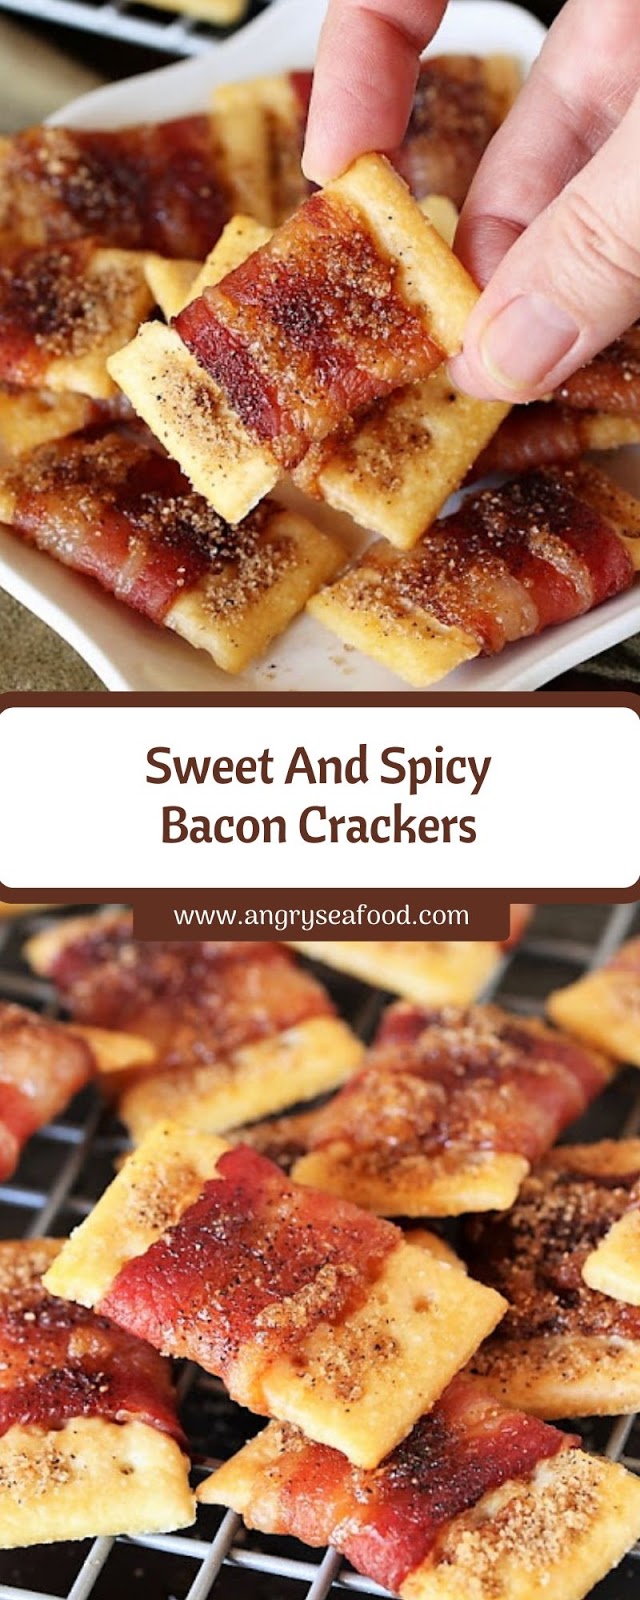 Sweet And Spicy Bacon Crackers